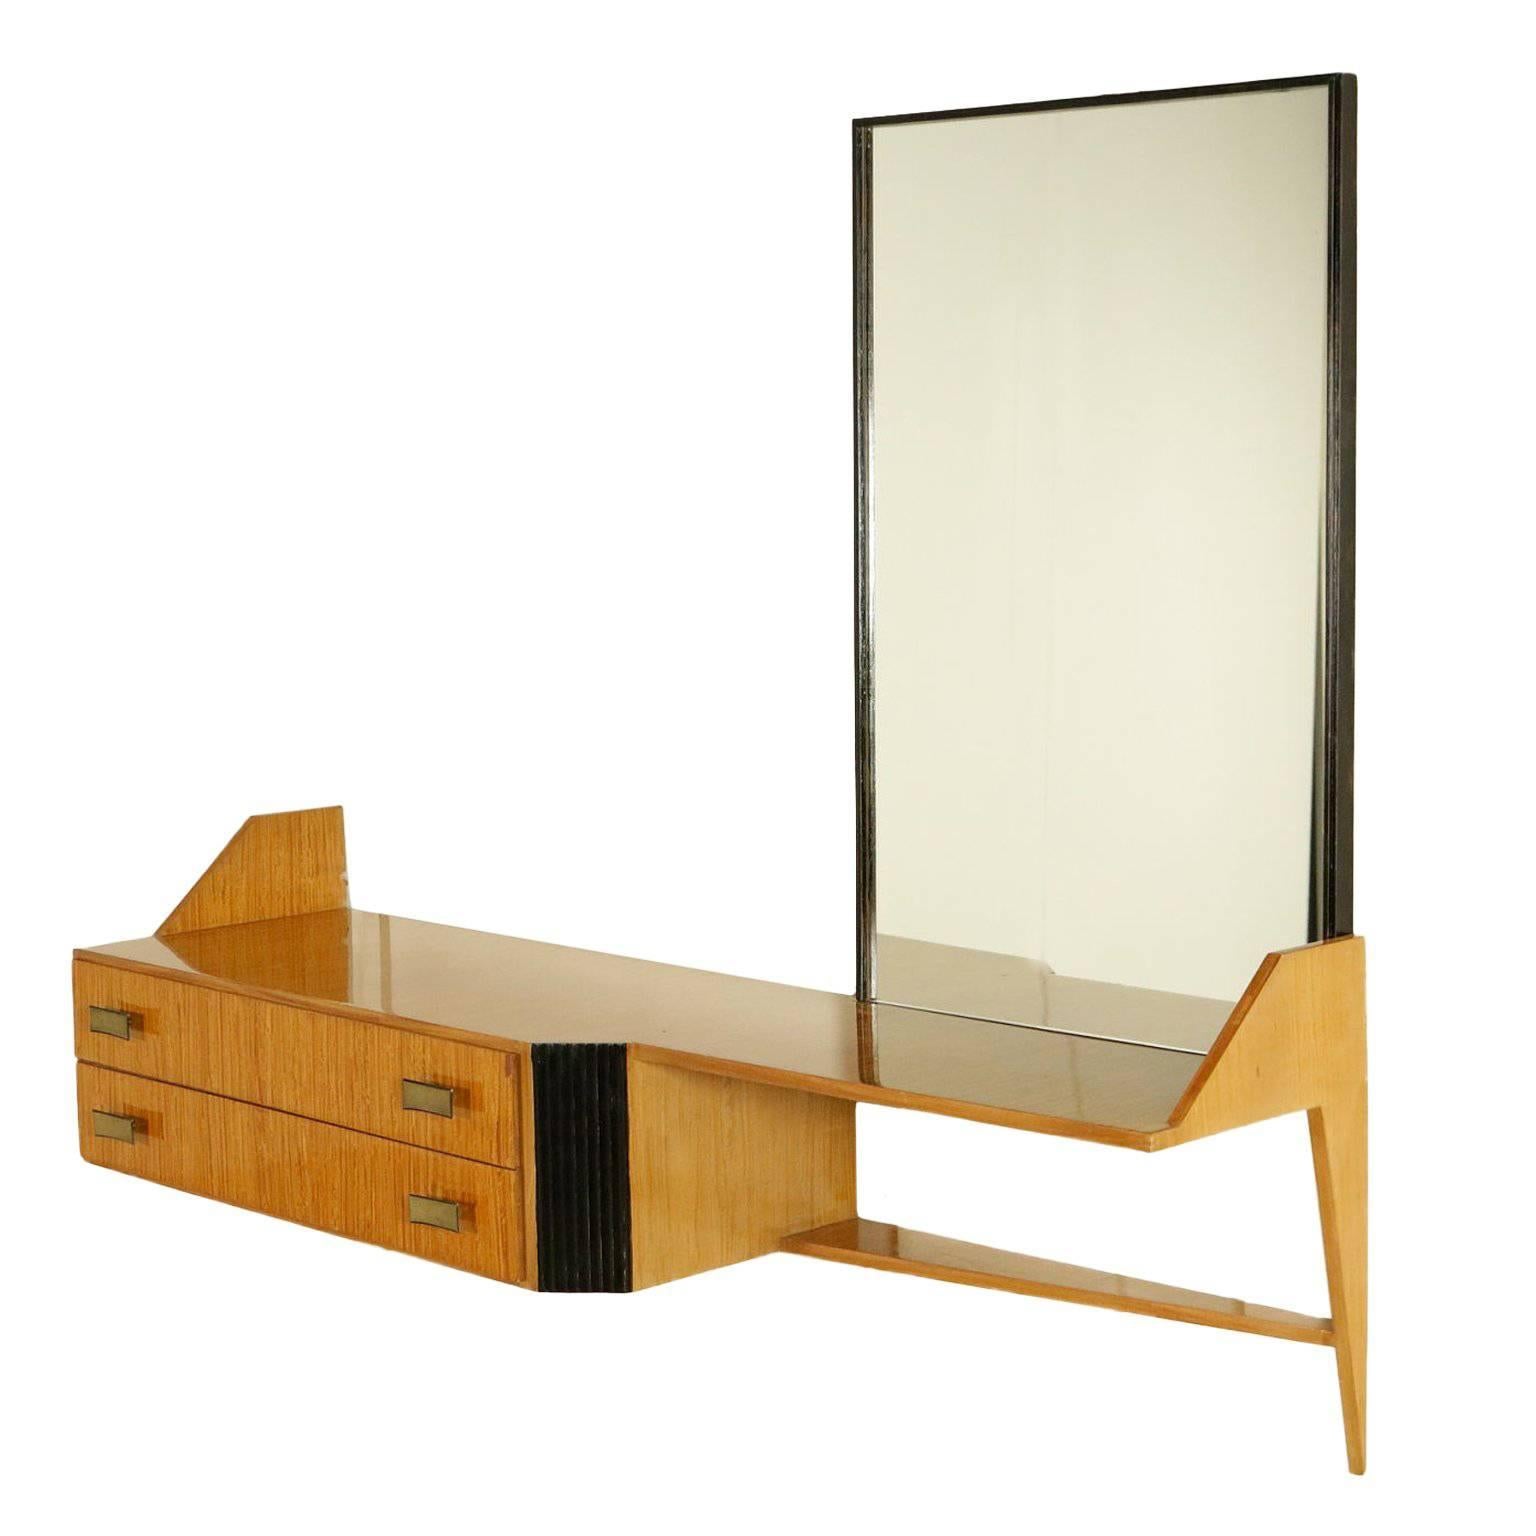 Dressing Table with Mirror Drawers Maple Veneer Brass Handles Italy, 1950s-1960s